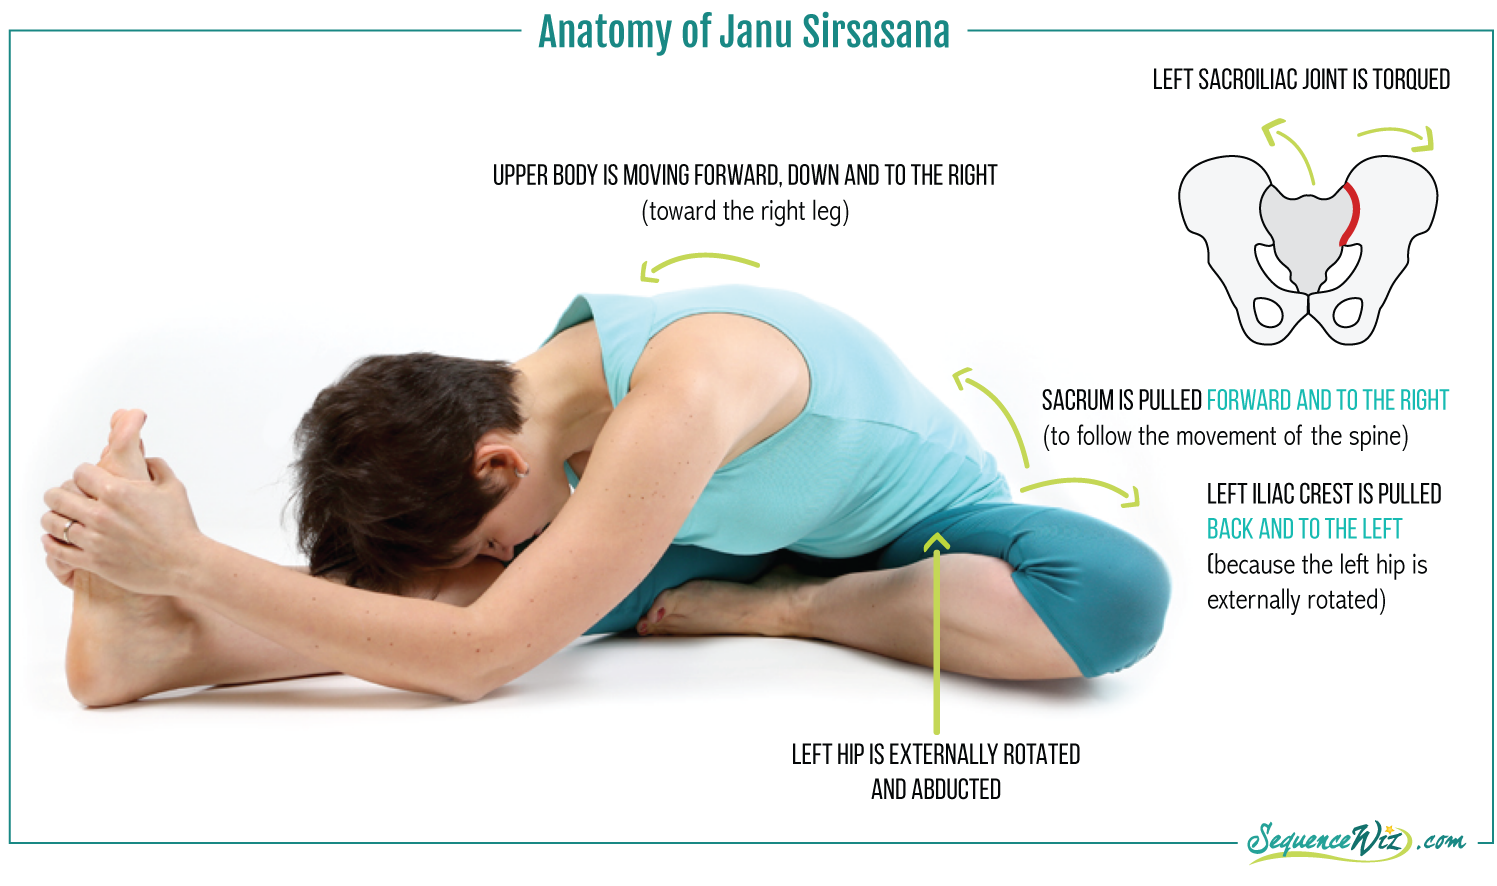 The Art of Living's Comprehensive Yoga Poses Finder | The Art of Living